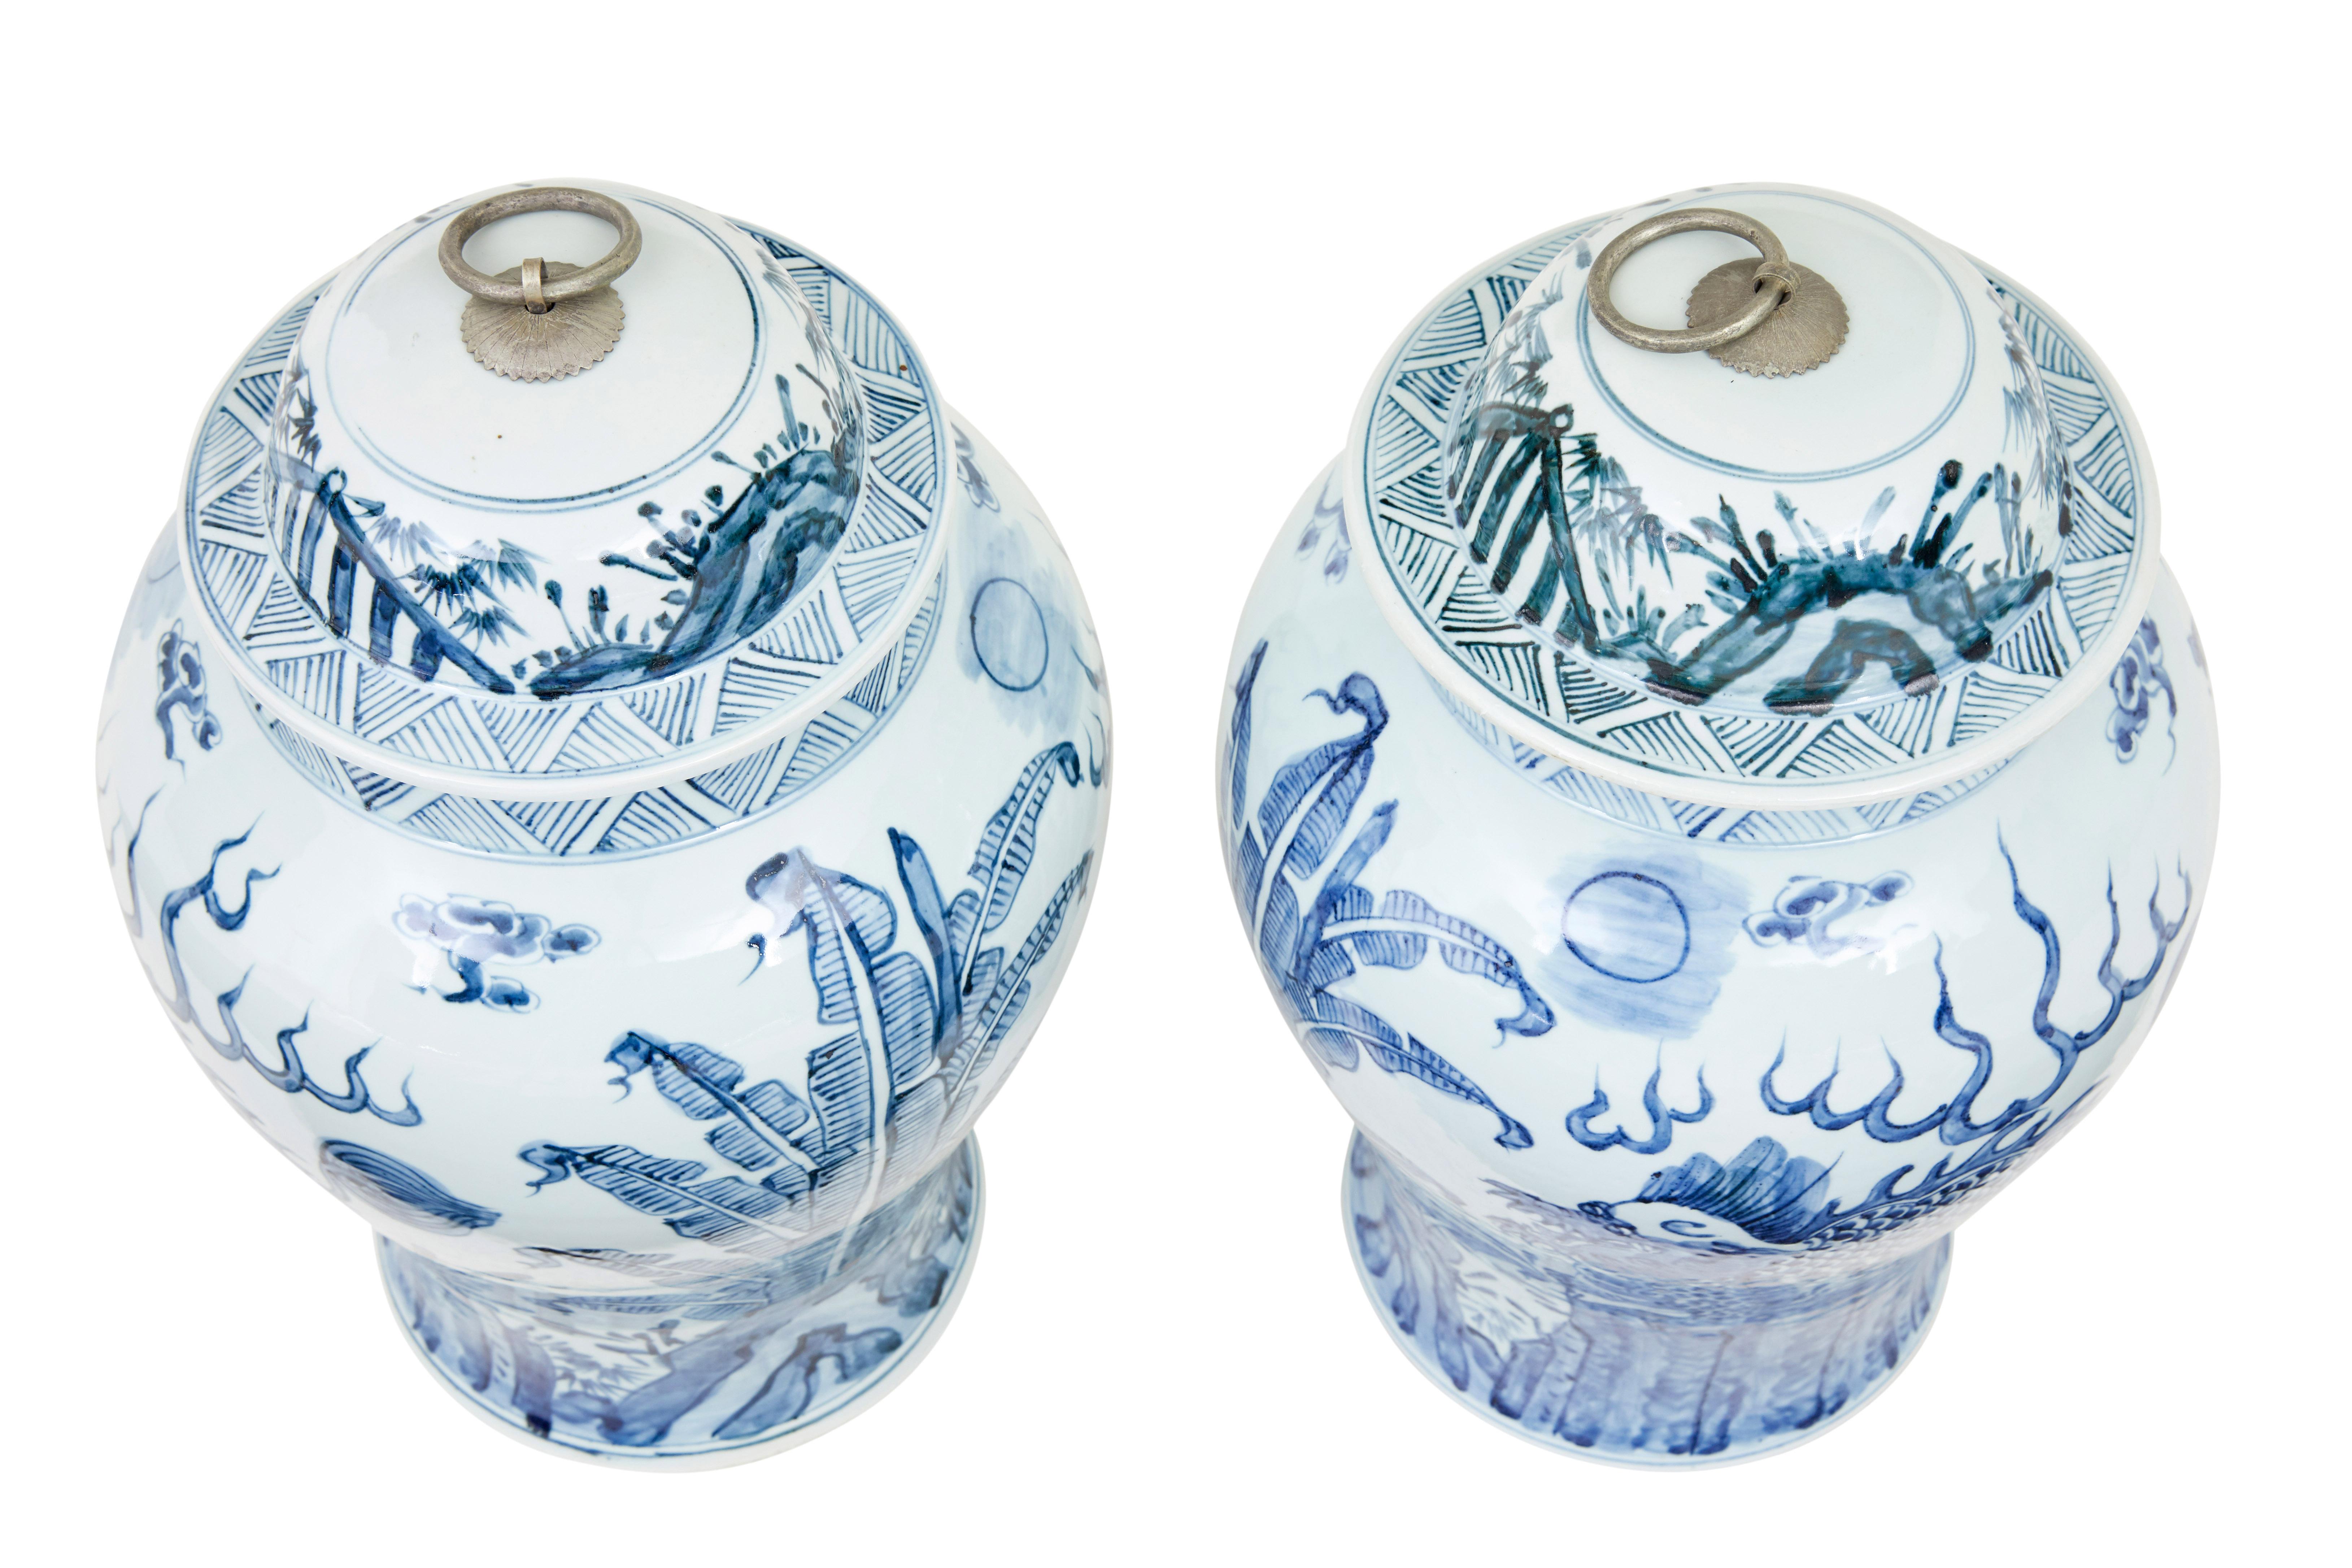 Pair of mid century ceramic ginger jars circa 1960.

Good quality Chinese export pieces, which are ideal for display purposes.

Hand painted with dragons and foliage.  Lift off lids which could be used for storage.  Please note that the lids are